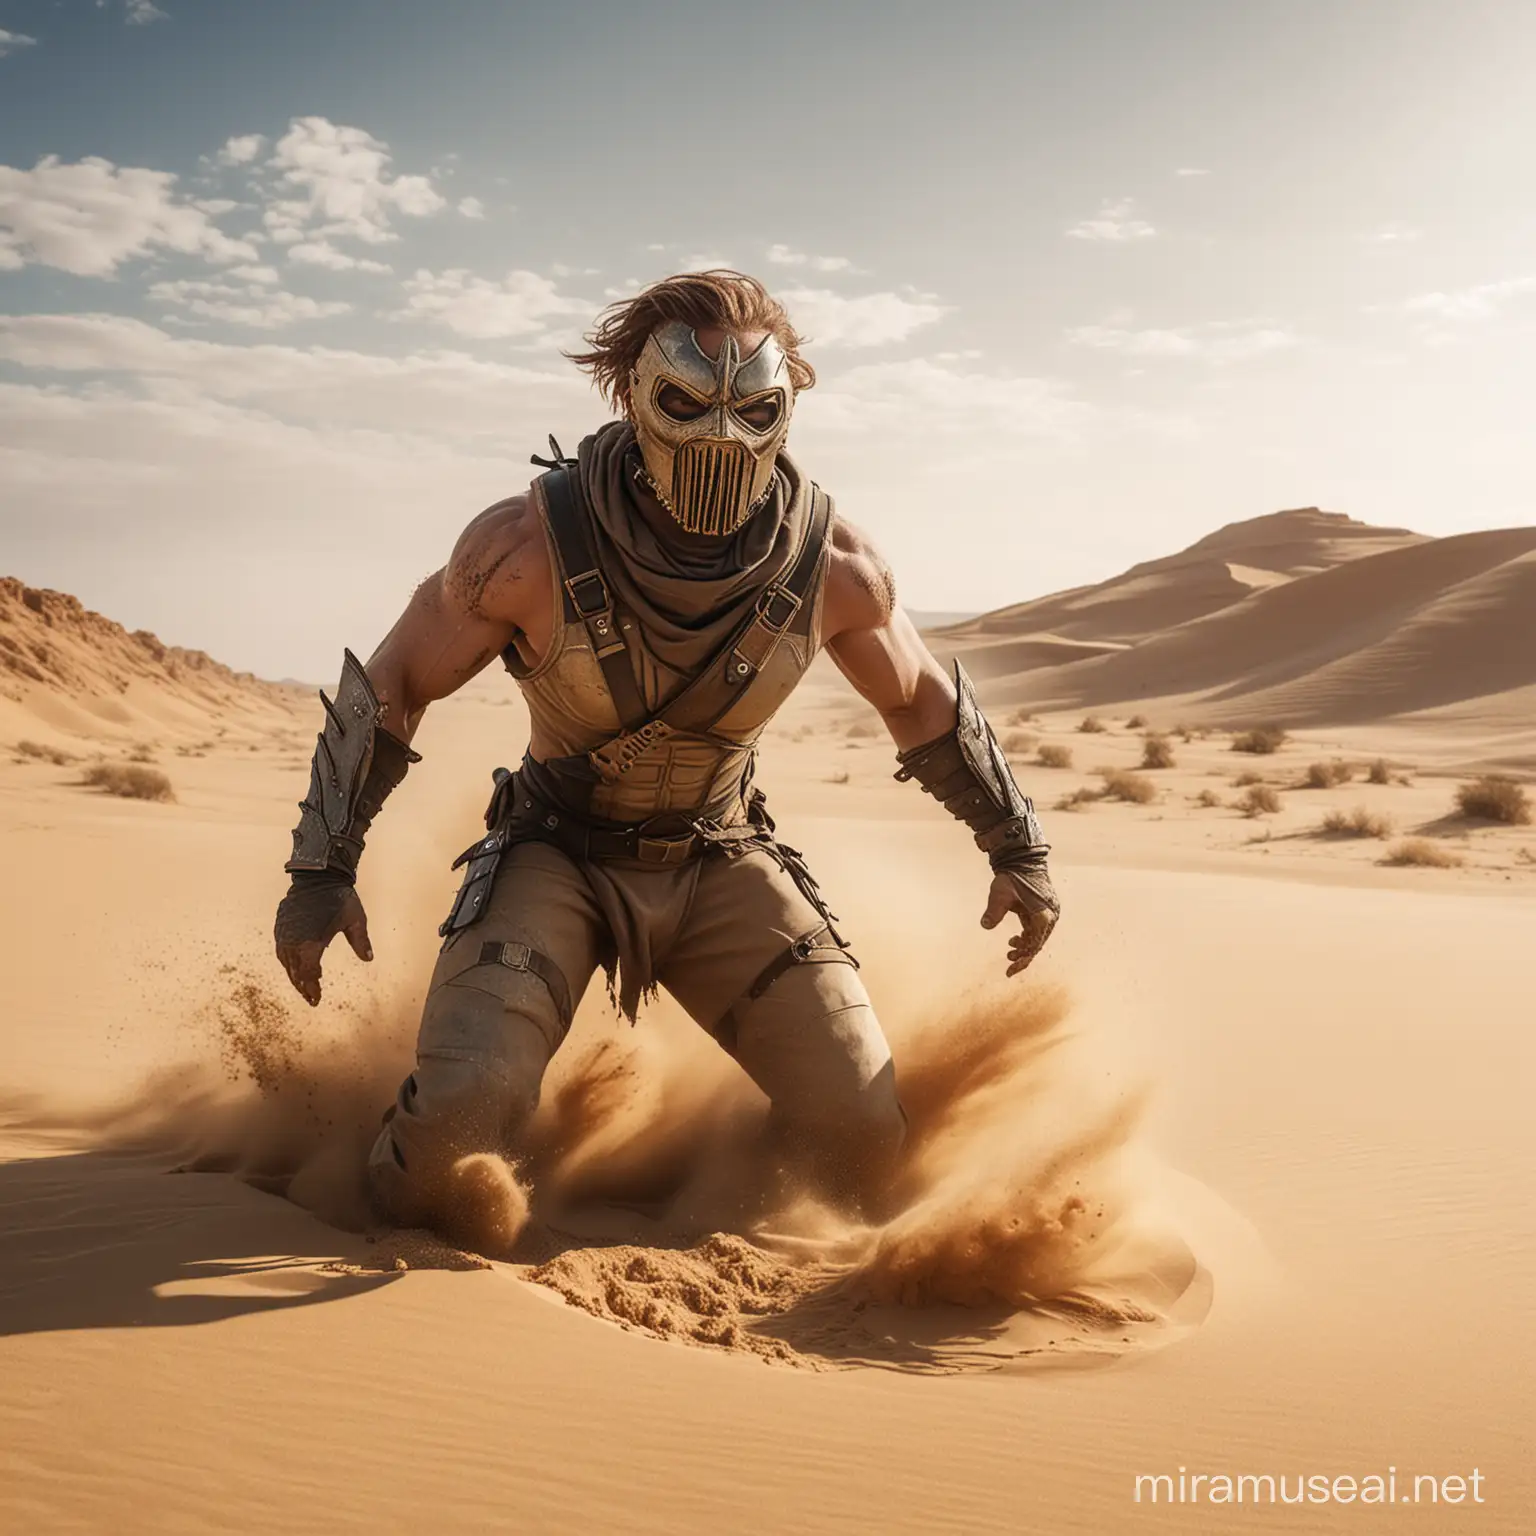 mutant warrior in a mask emerging from under the sand in the air in a desert